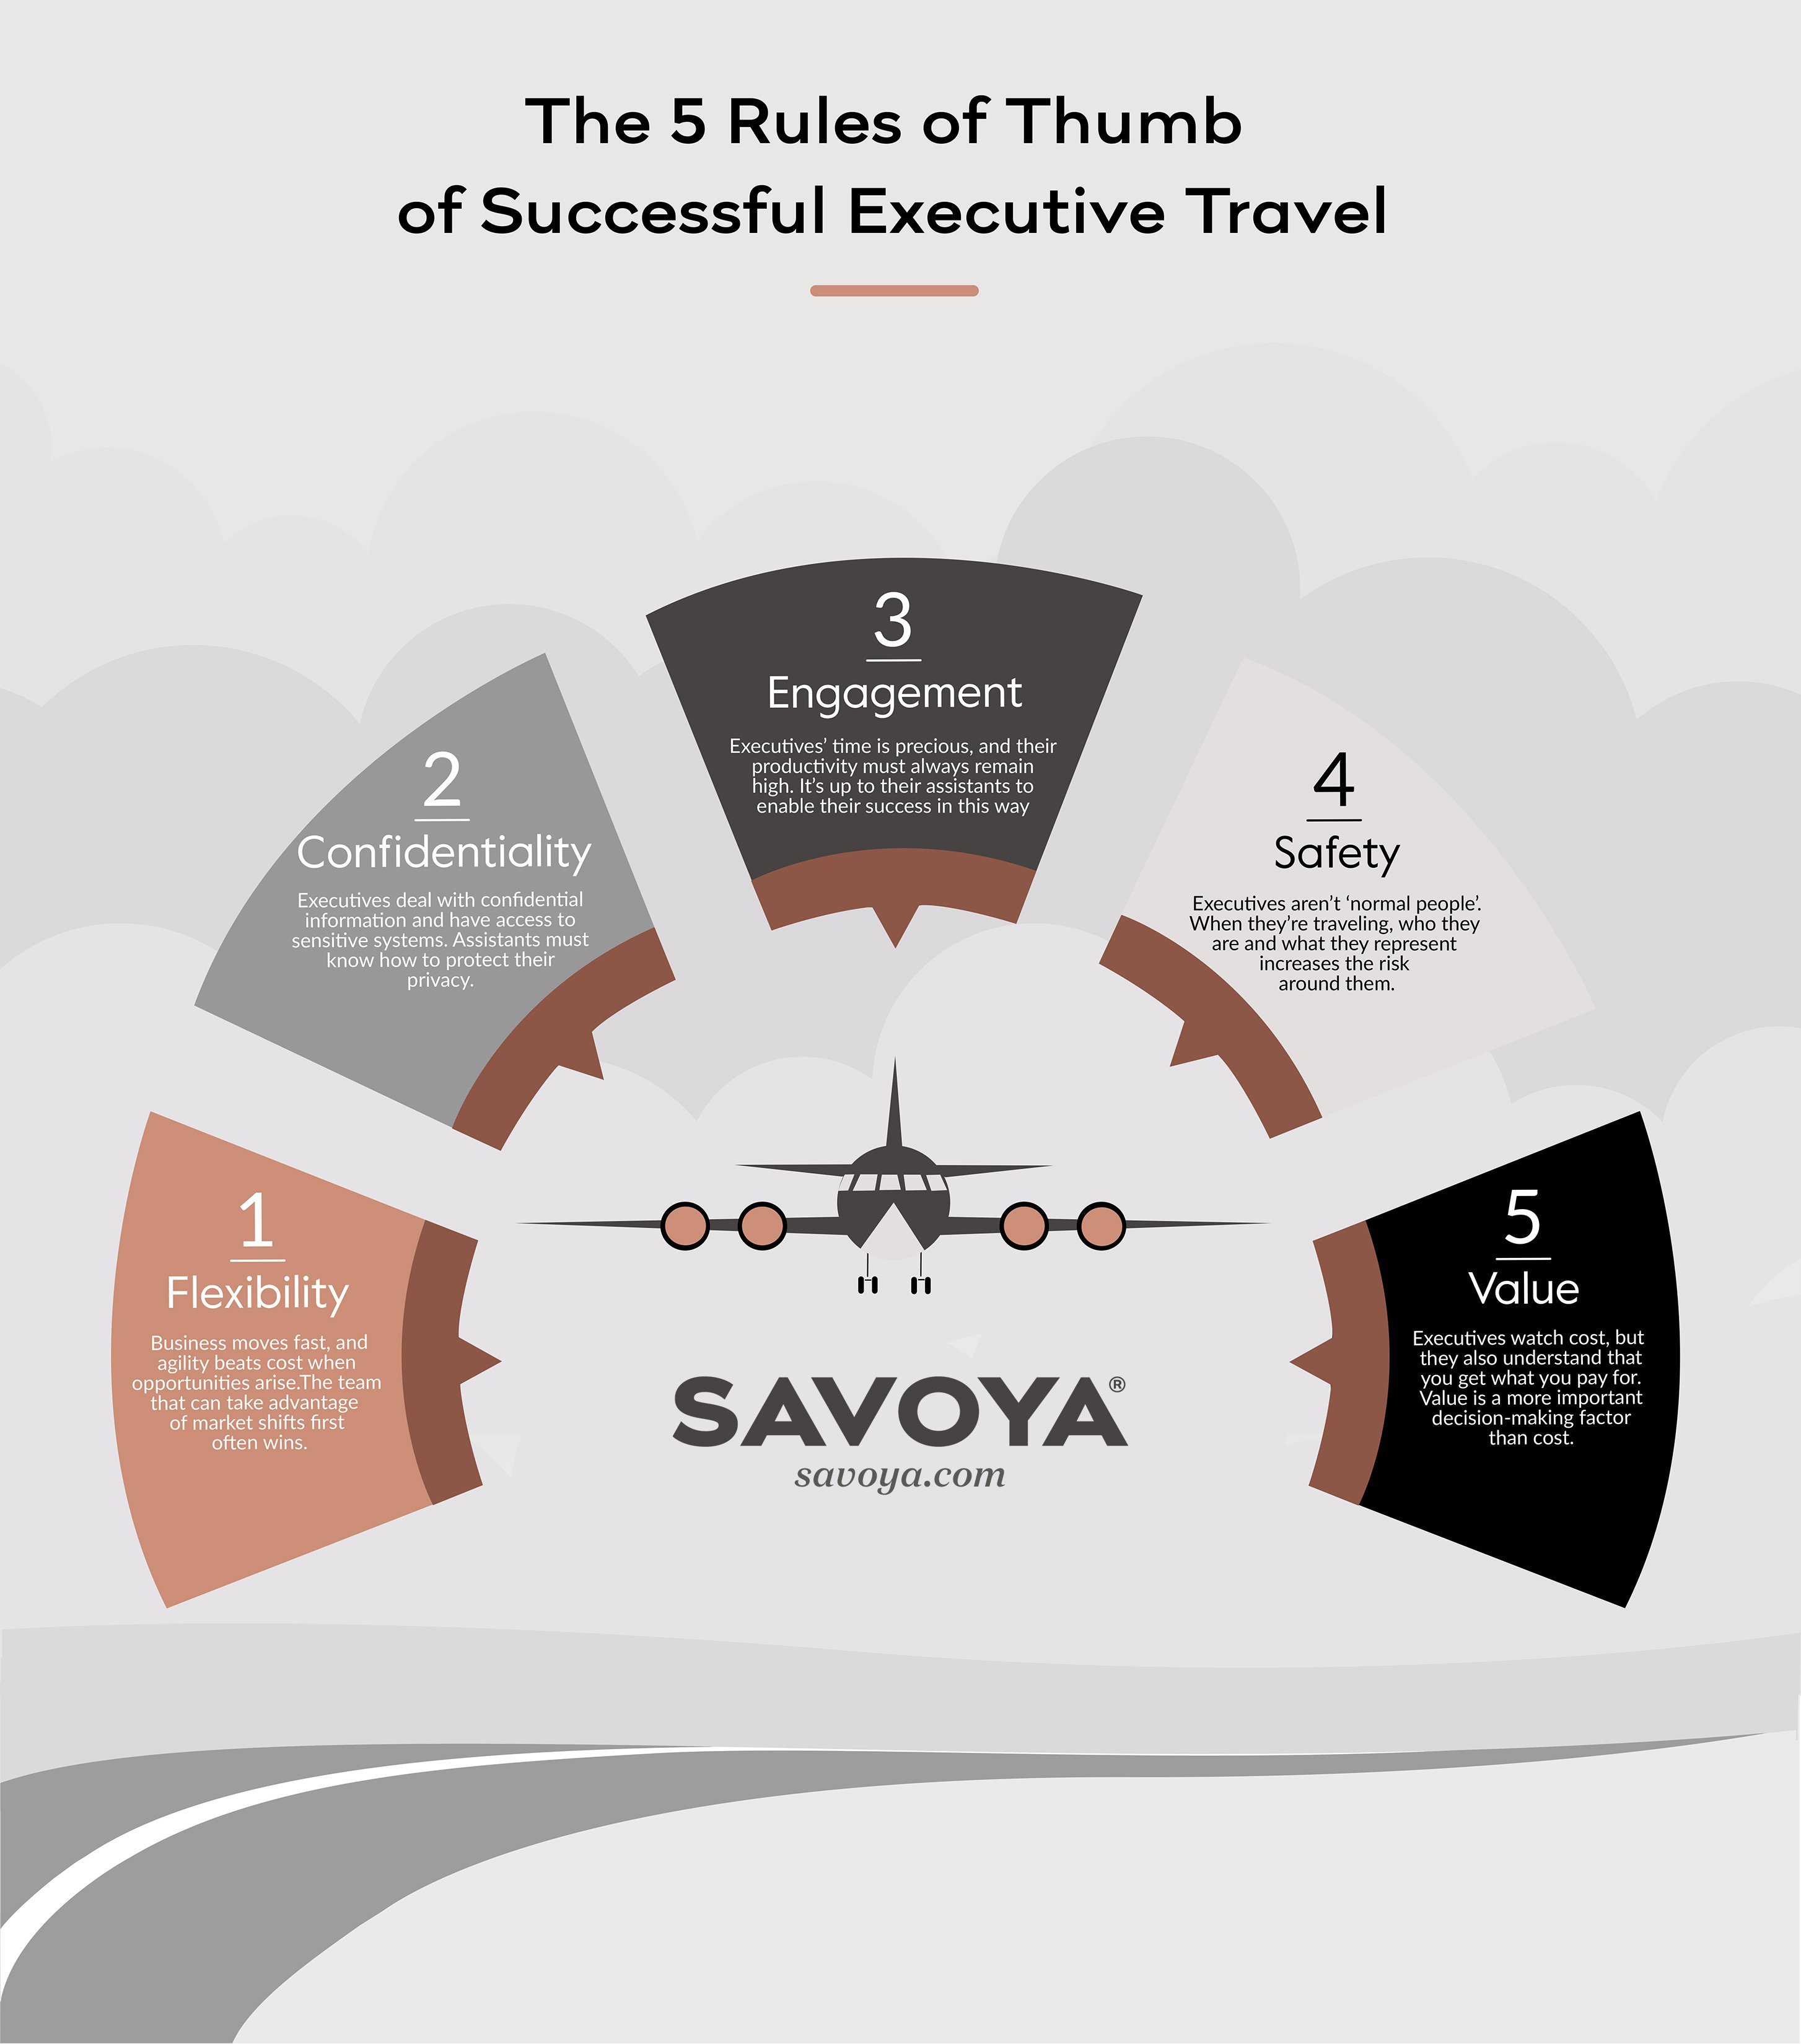 The 5 Rules of Thumb for Executive Travel Management